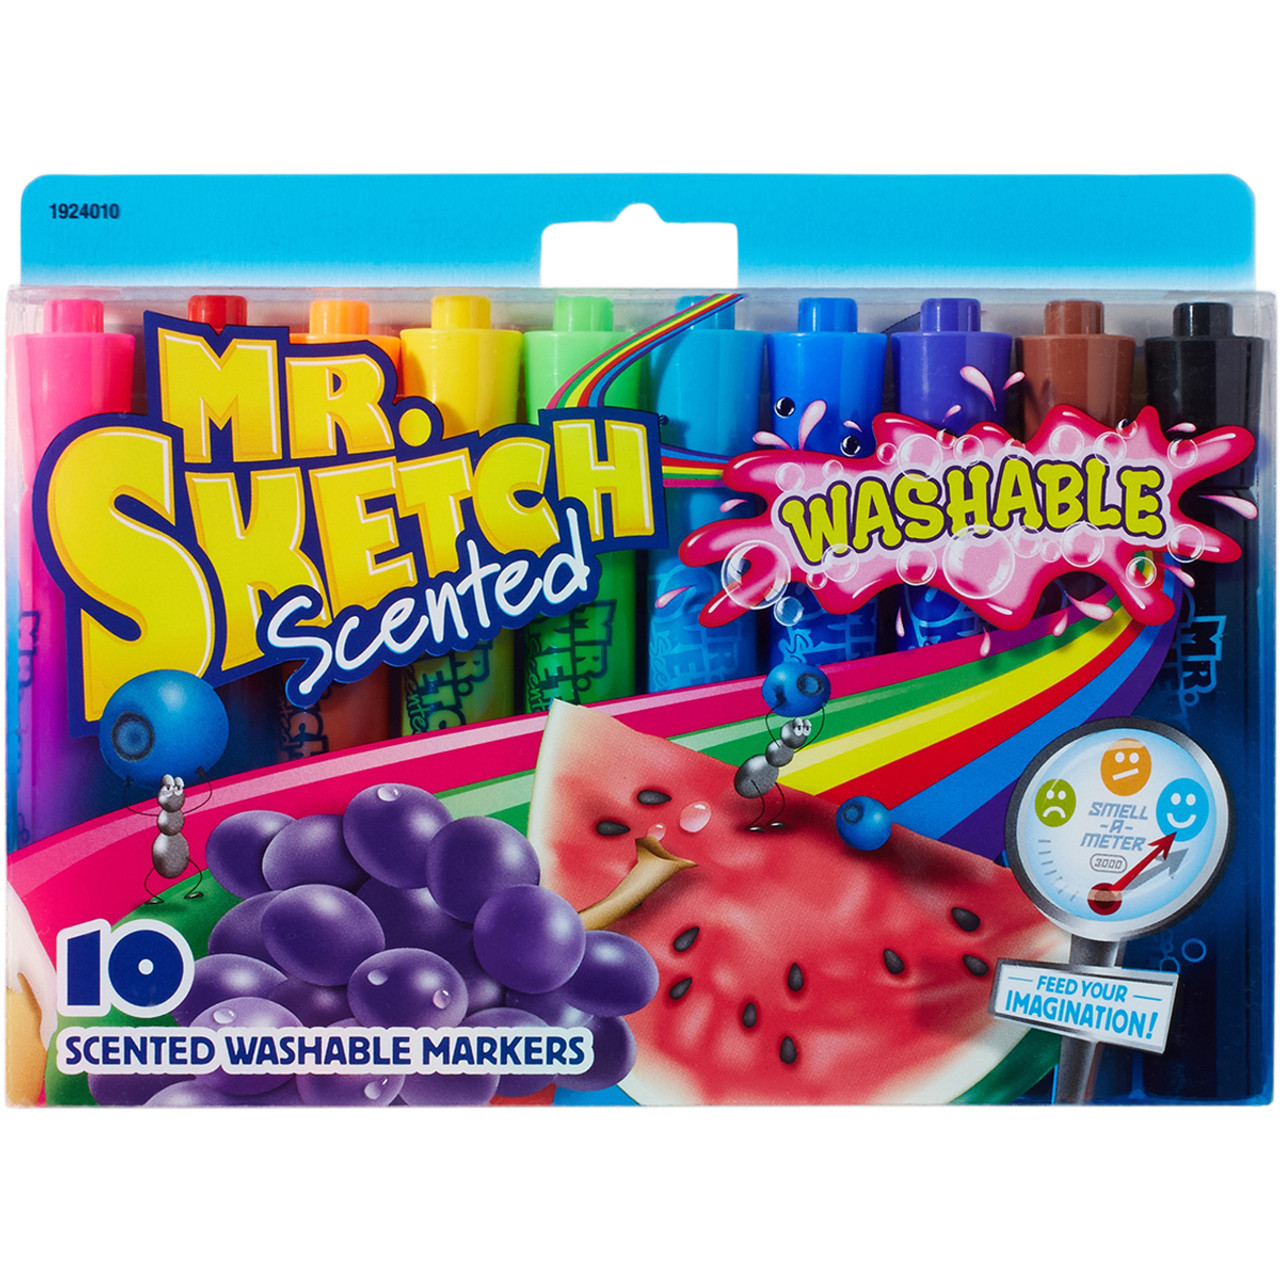 Mr. Sketch Watercolor Markers Scented Assorted Colors Set Of 12